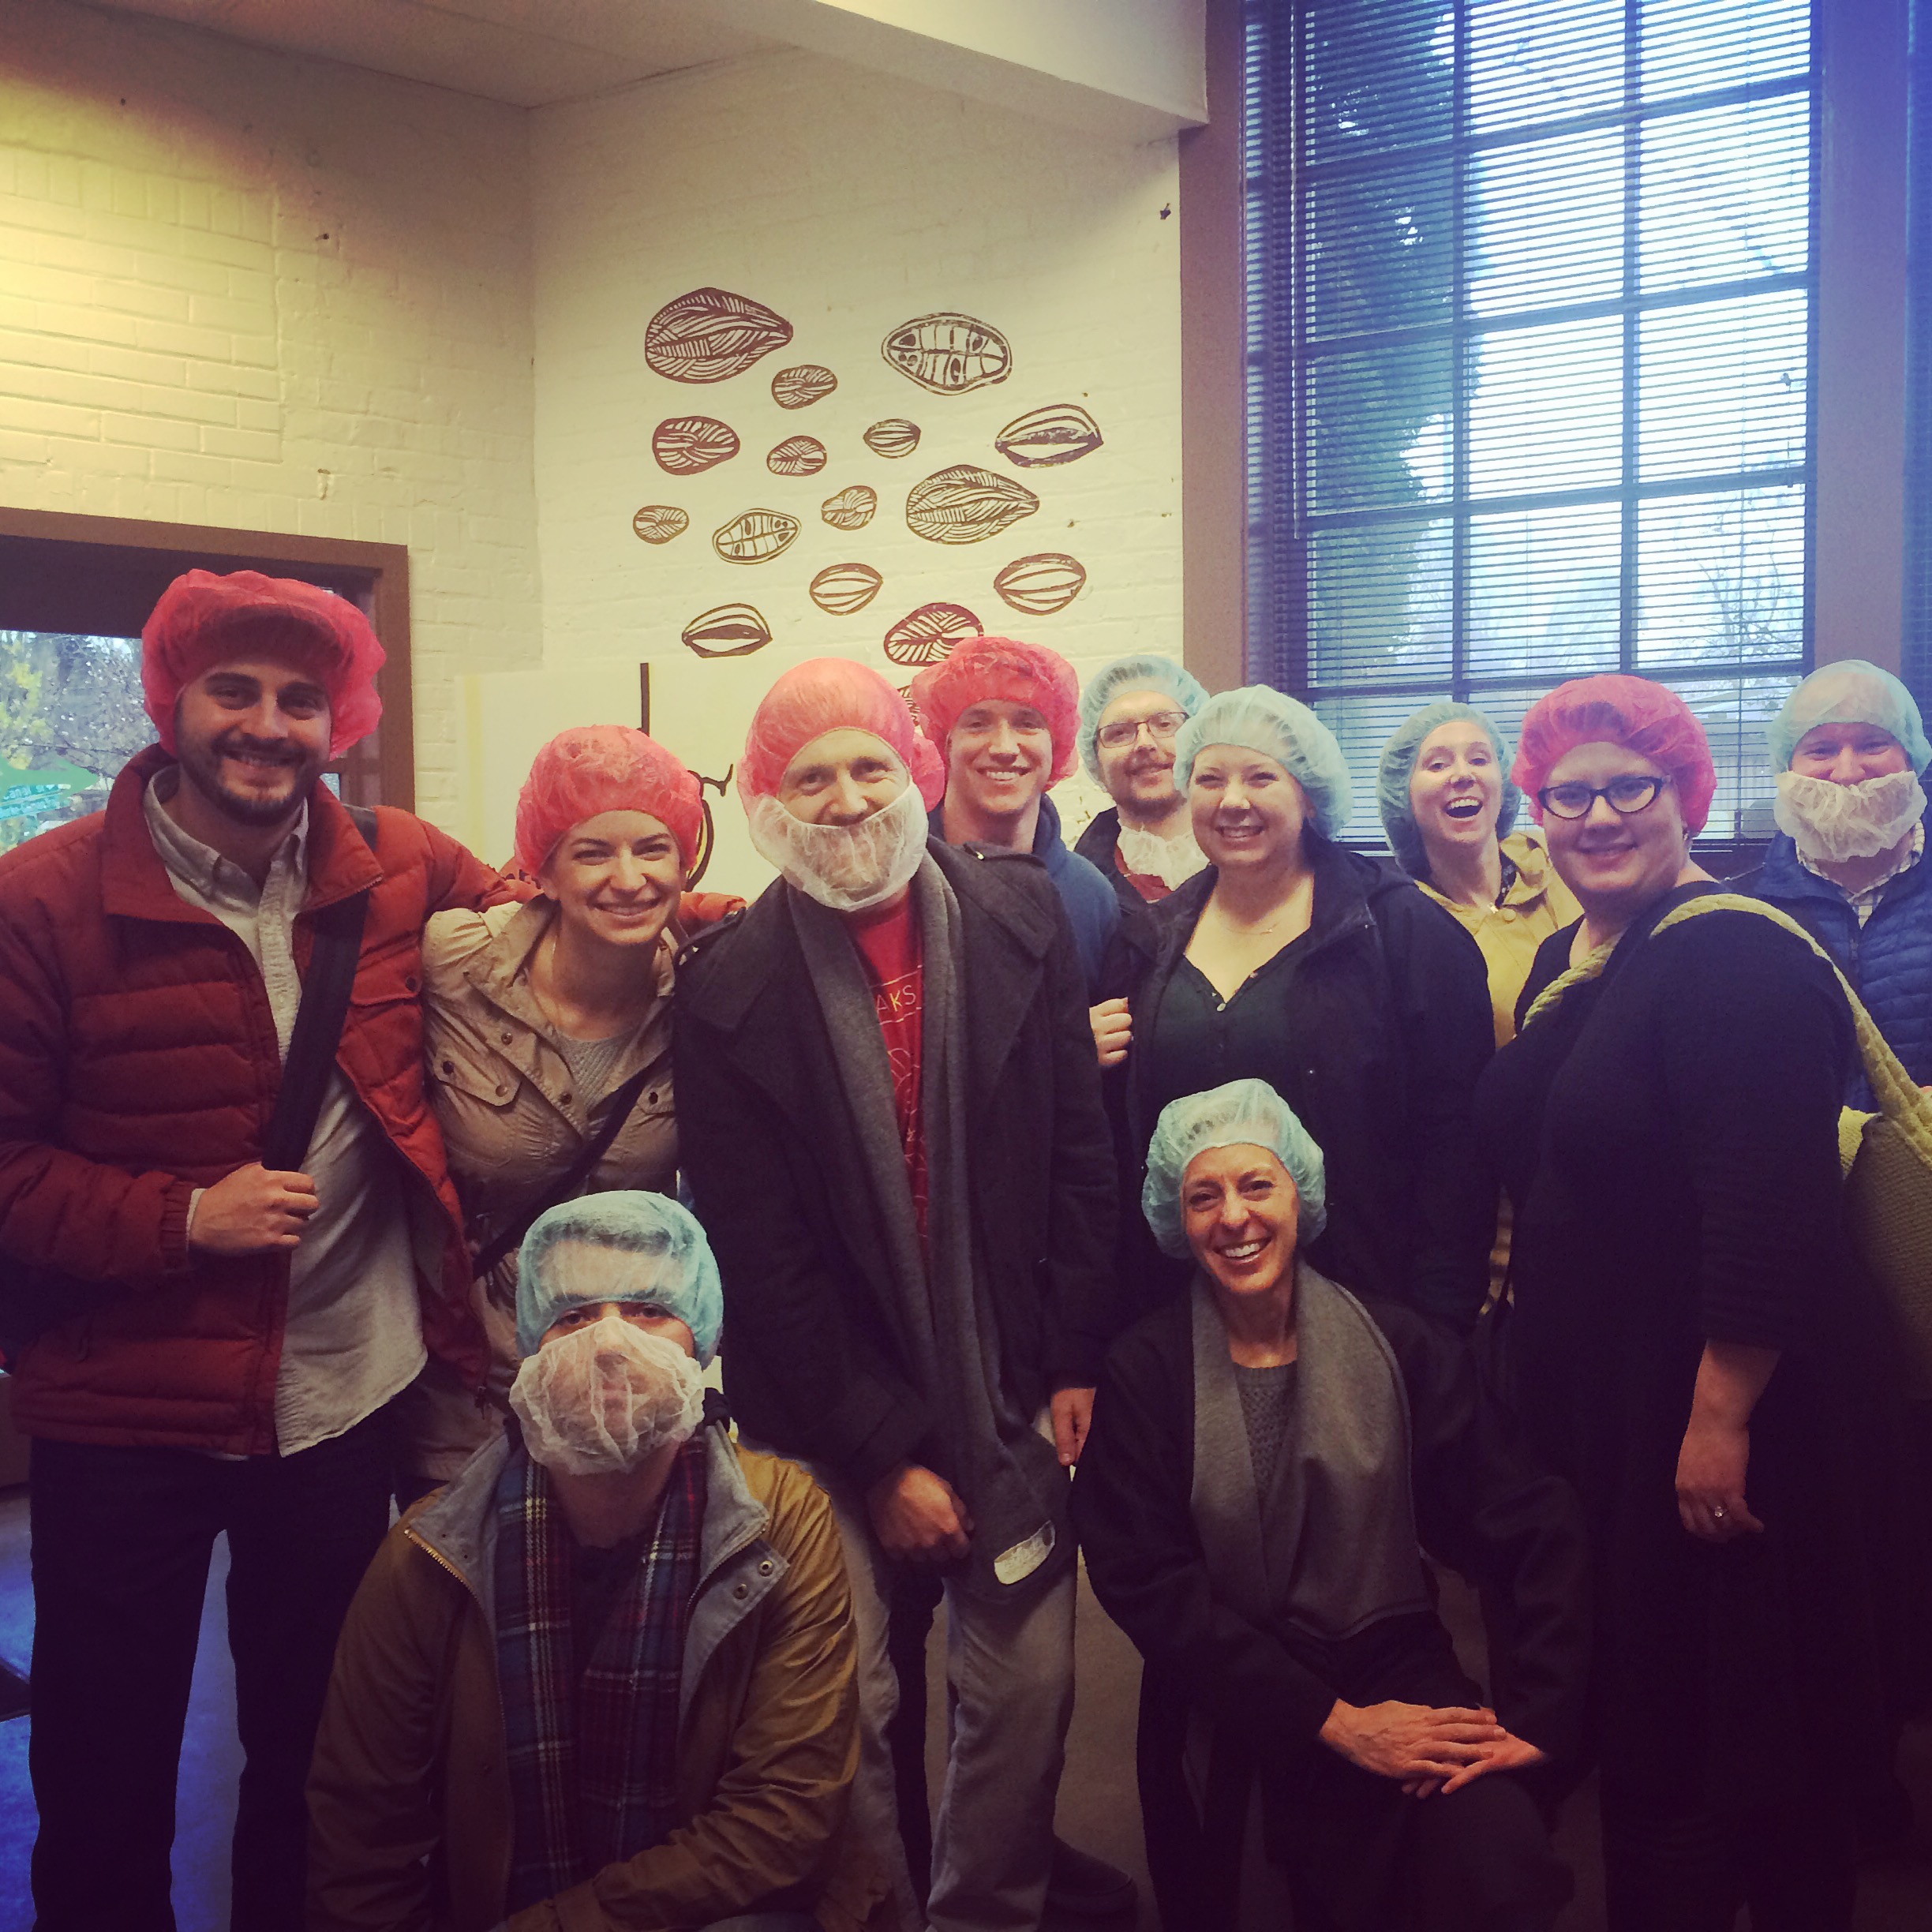 In our hair nets inside the factory.